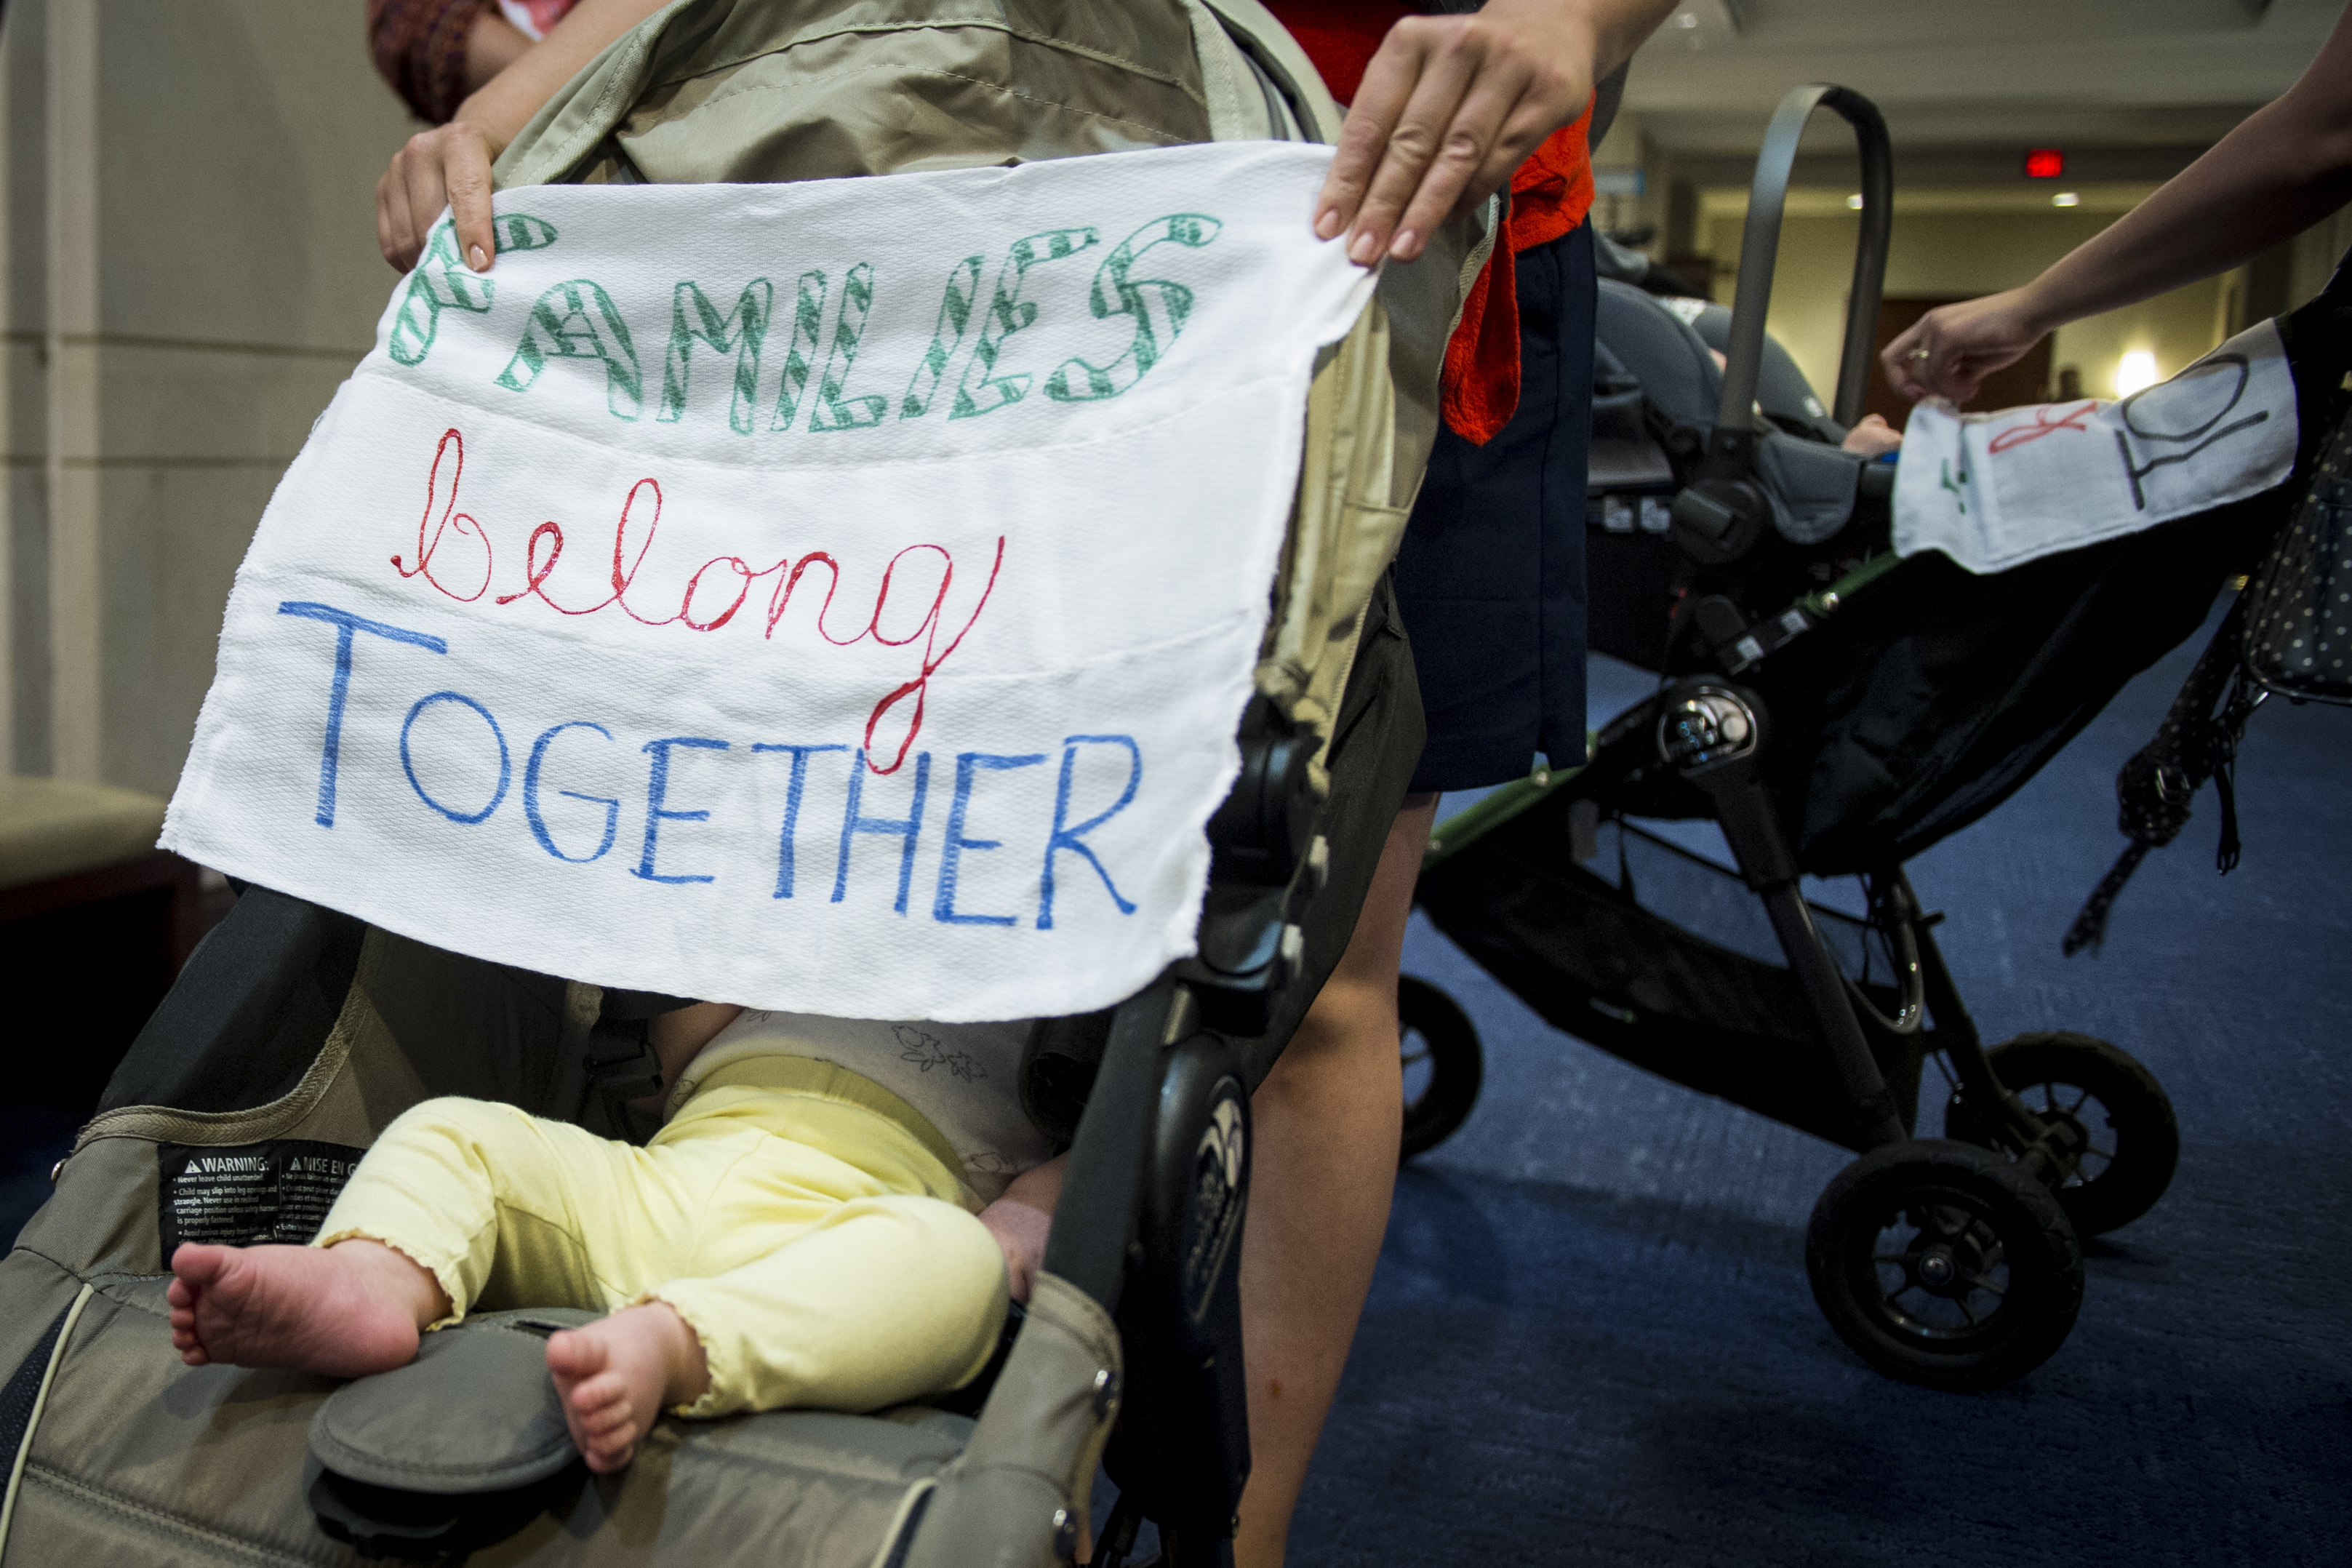 UNITED STATES - June 19: A group of mothers and their children protesting the separation of families at the southern border are escorted out of the 